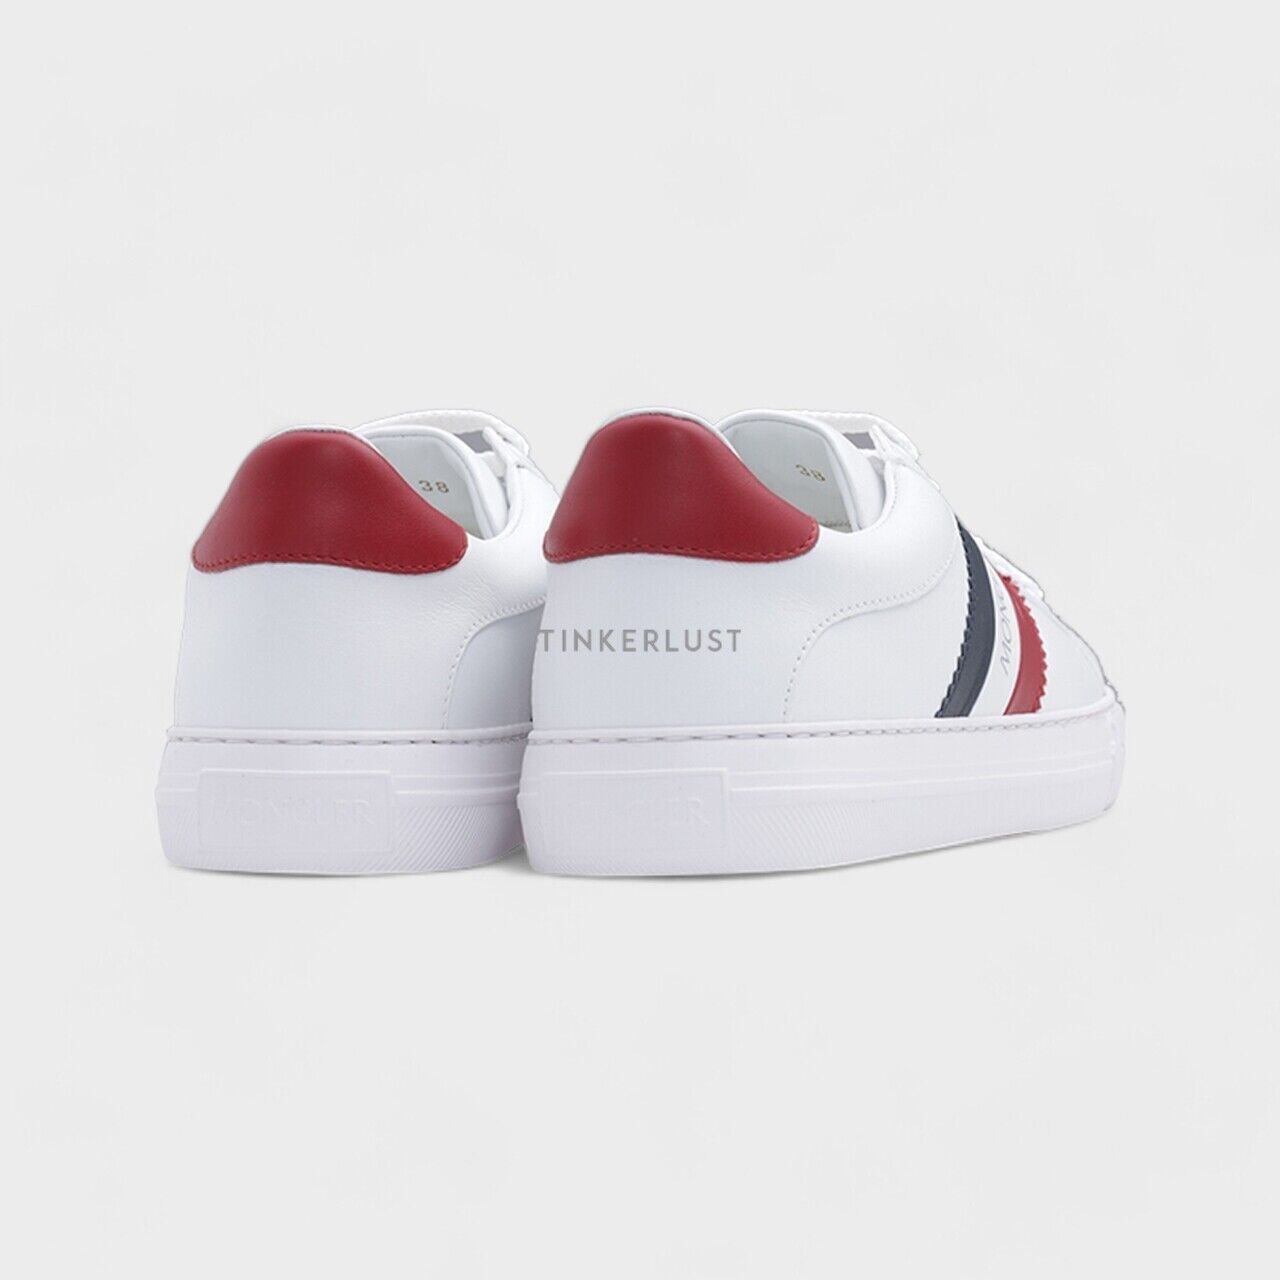 Moncler Women Ariel Tennis Sneakers in White with Iconic Band 